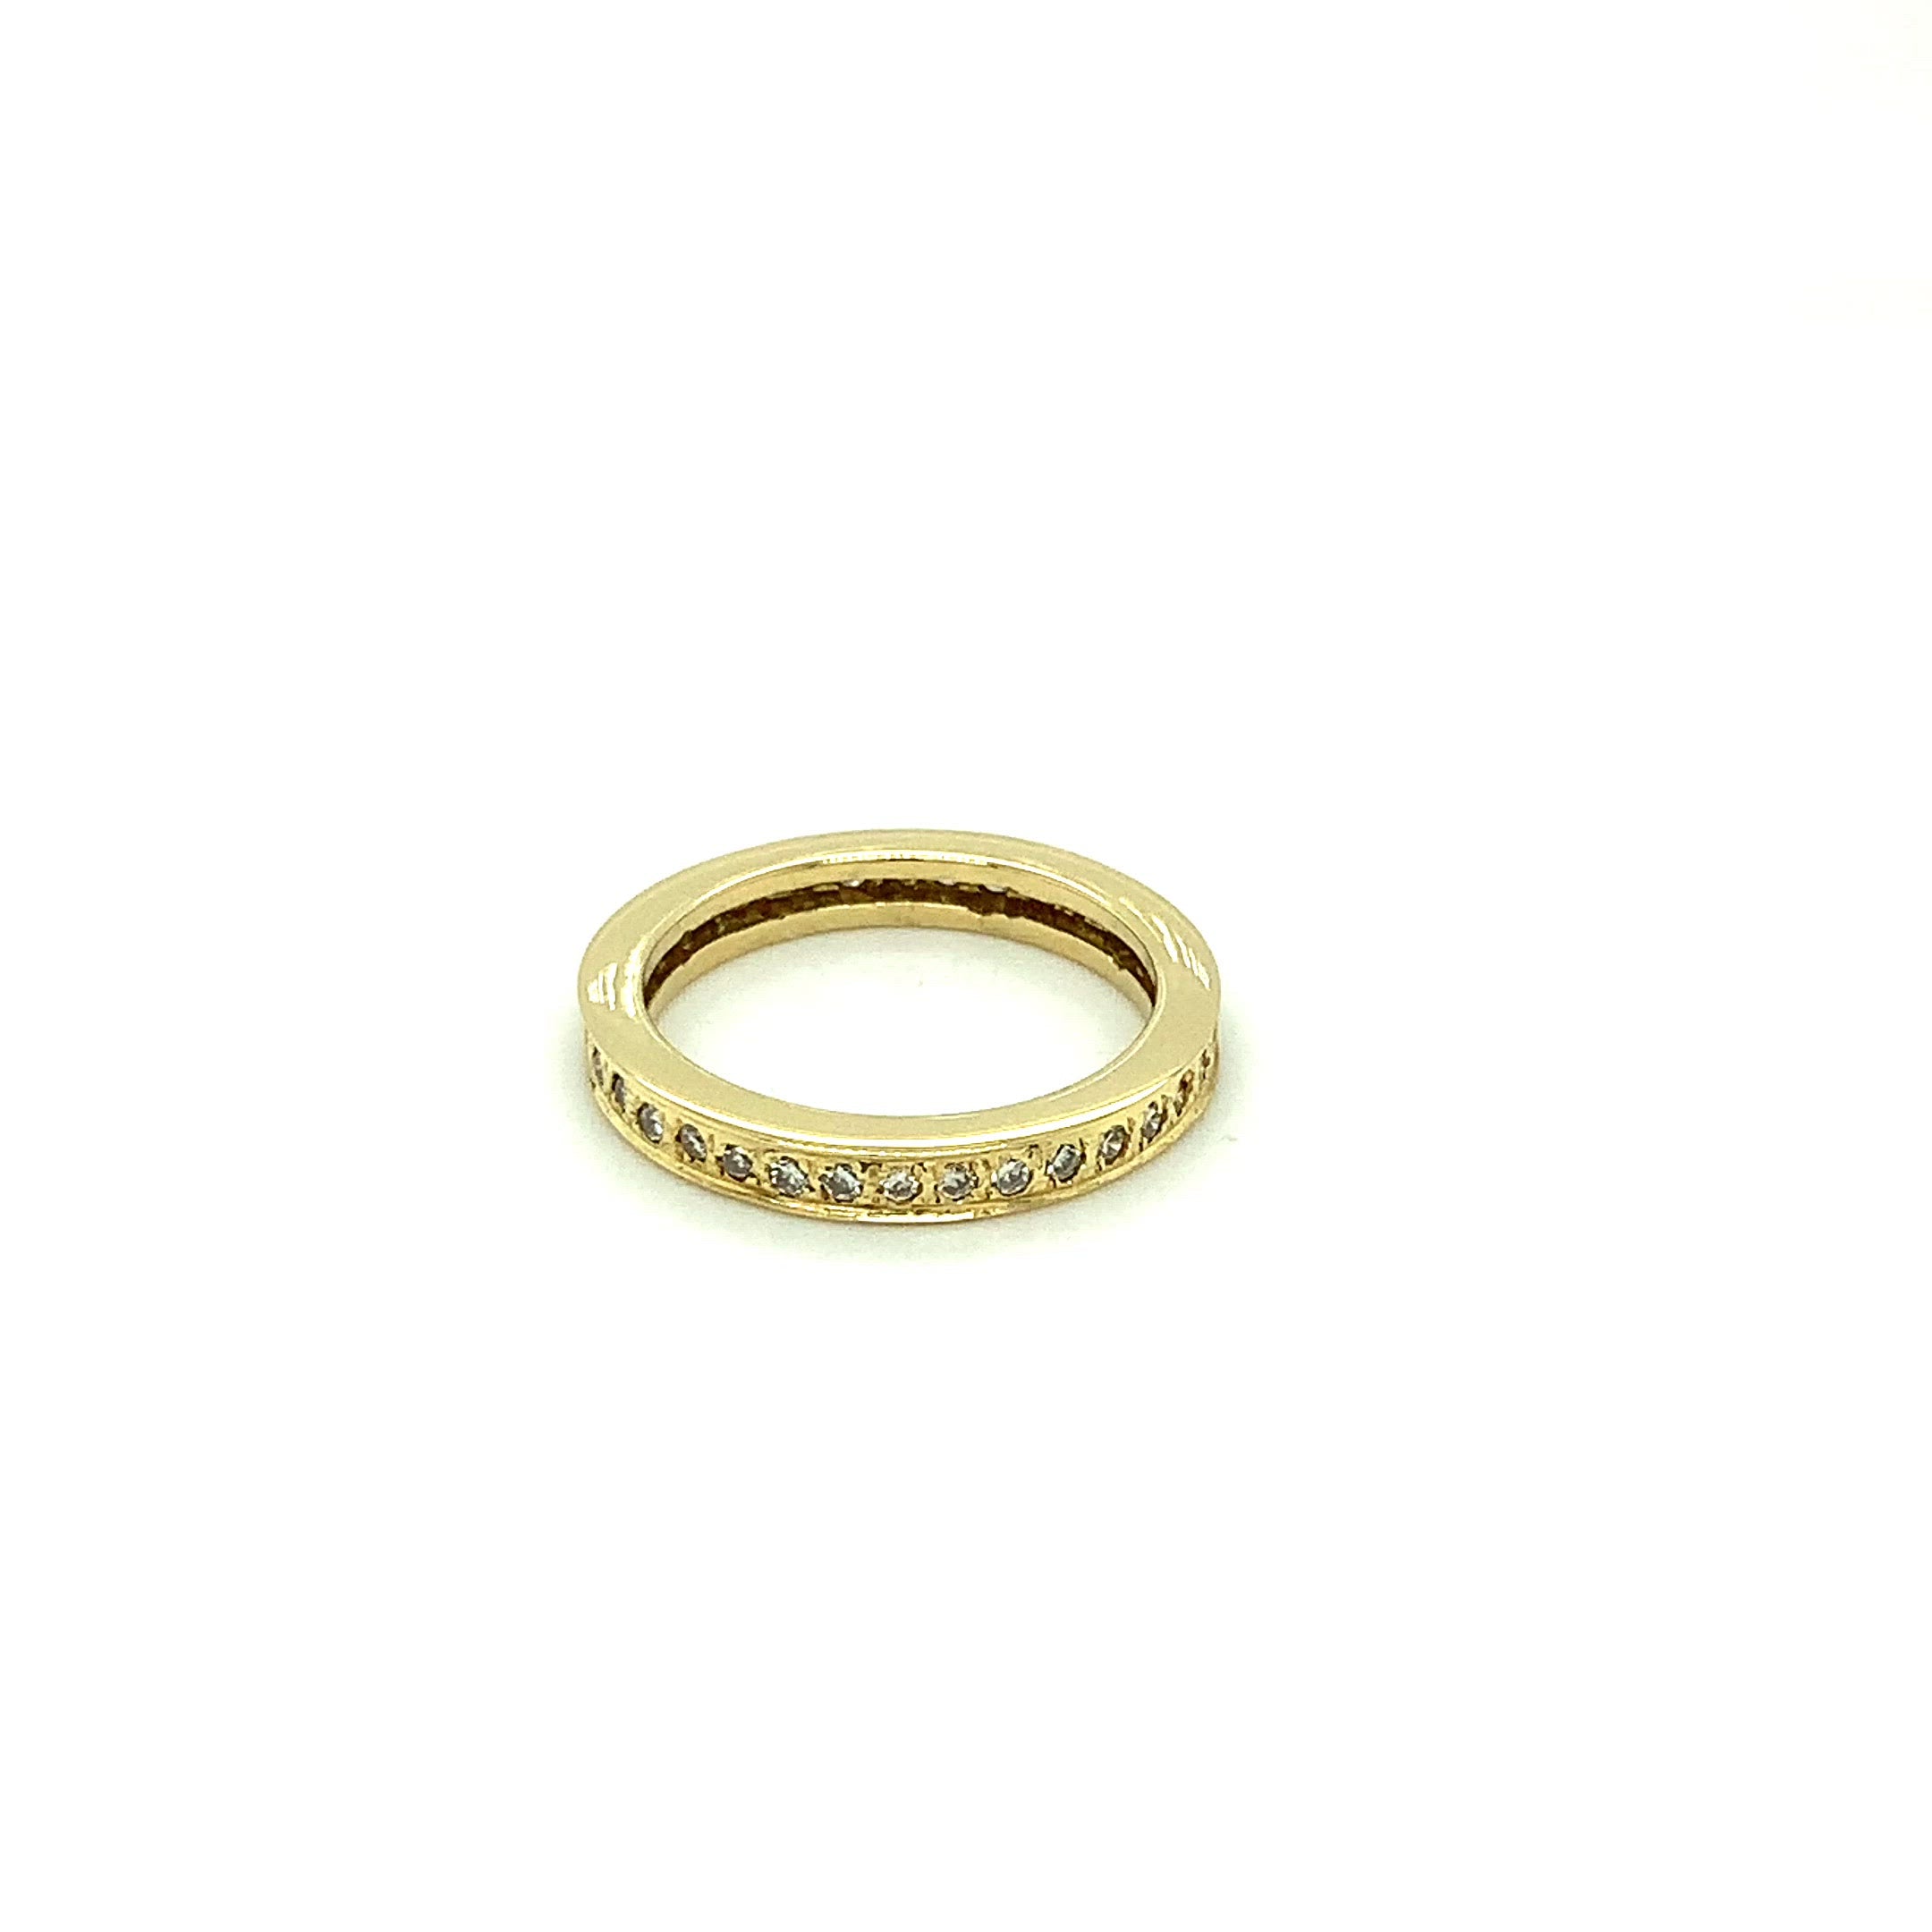 Natural Diamond Ring 18K Solid Gold .36tcw Diamond Band Eternity Ring Wedding Ring Wedding Band Stackable Ring Bridal Jewelry Fine Gold Band